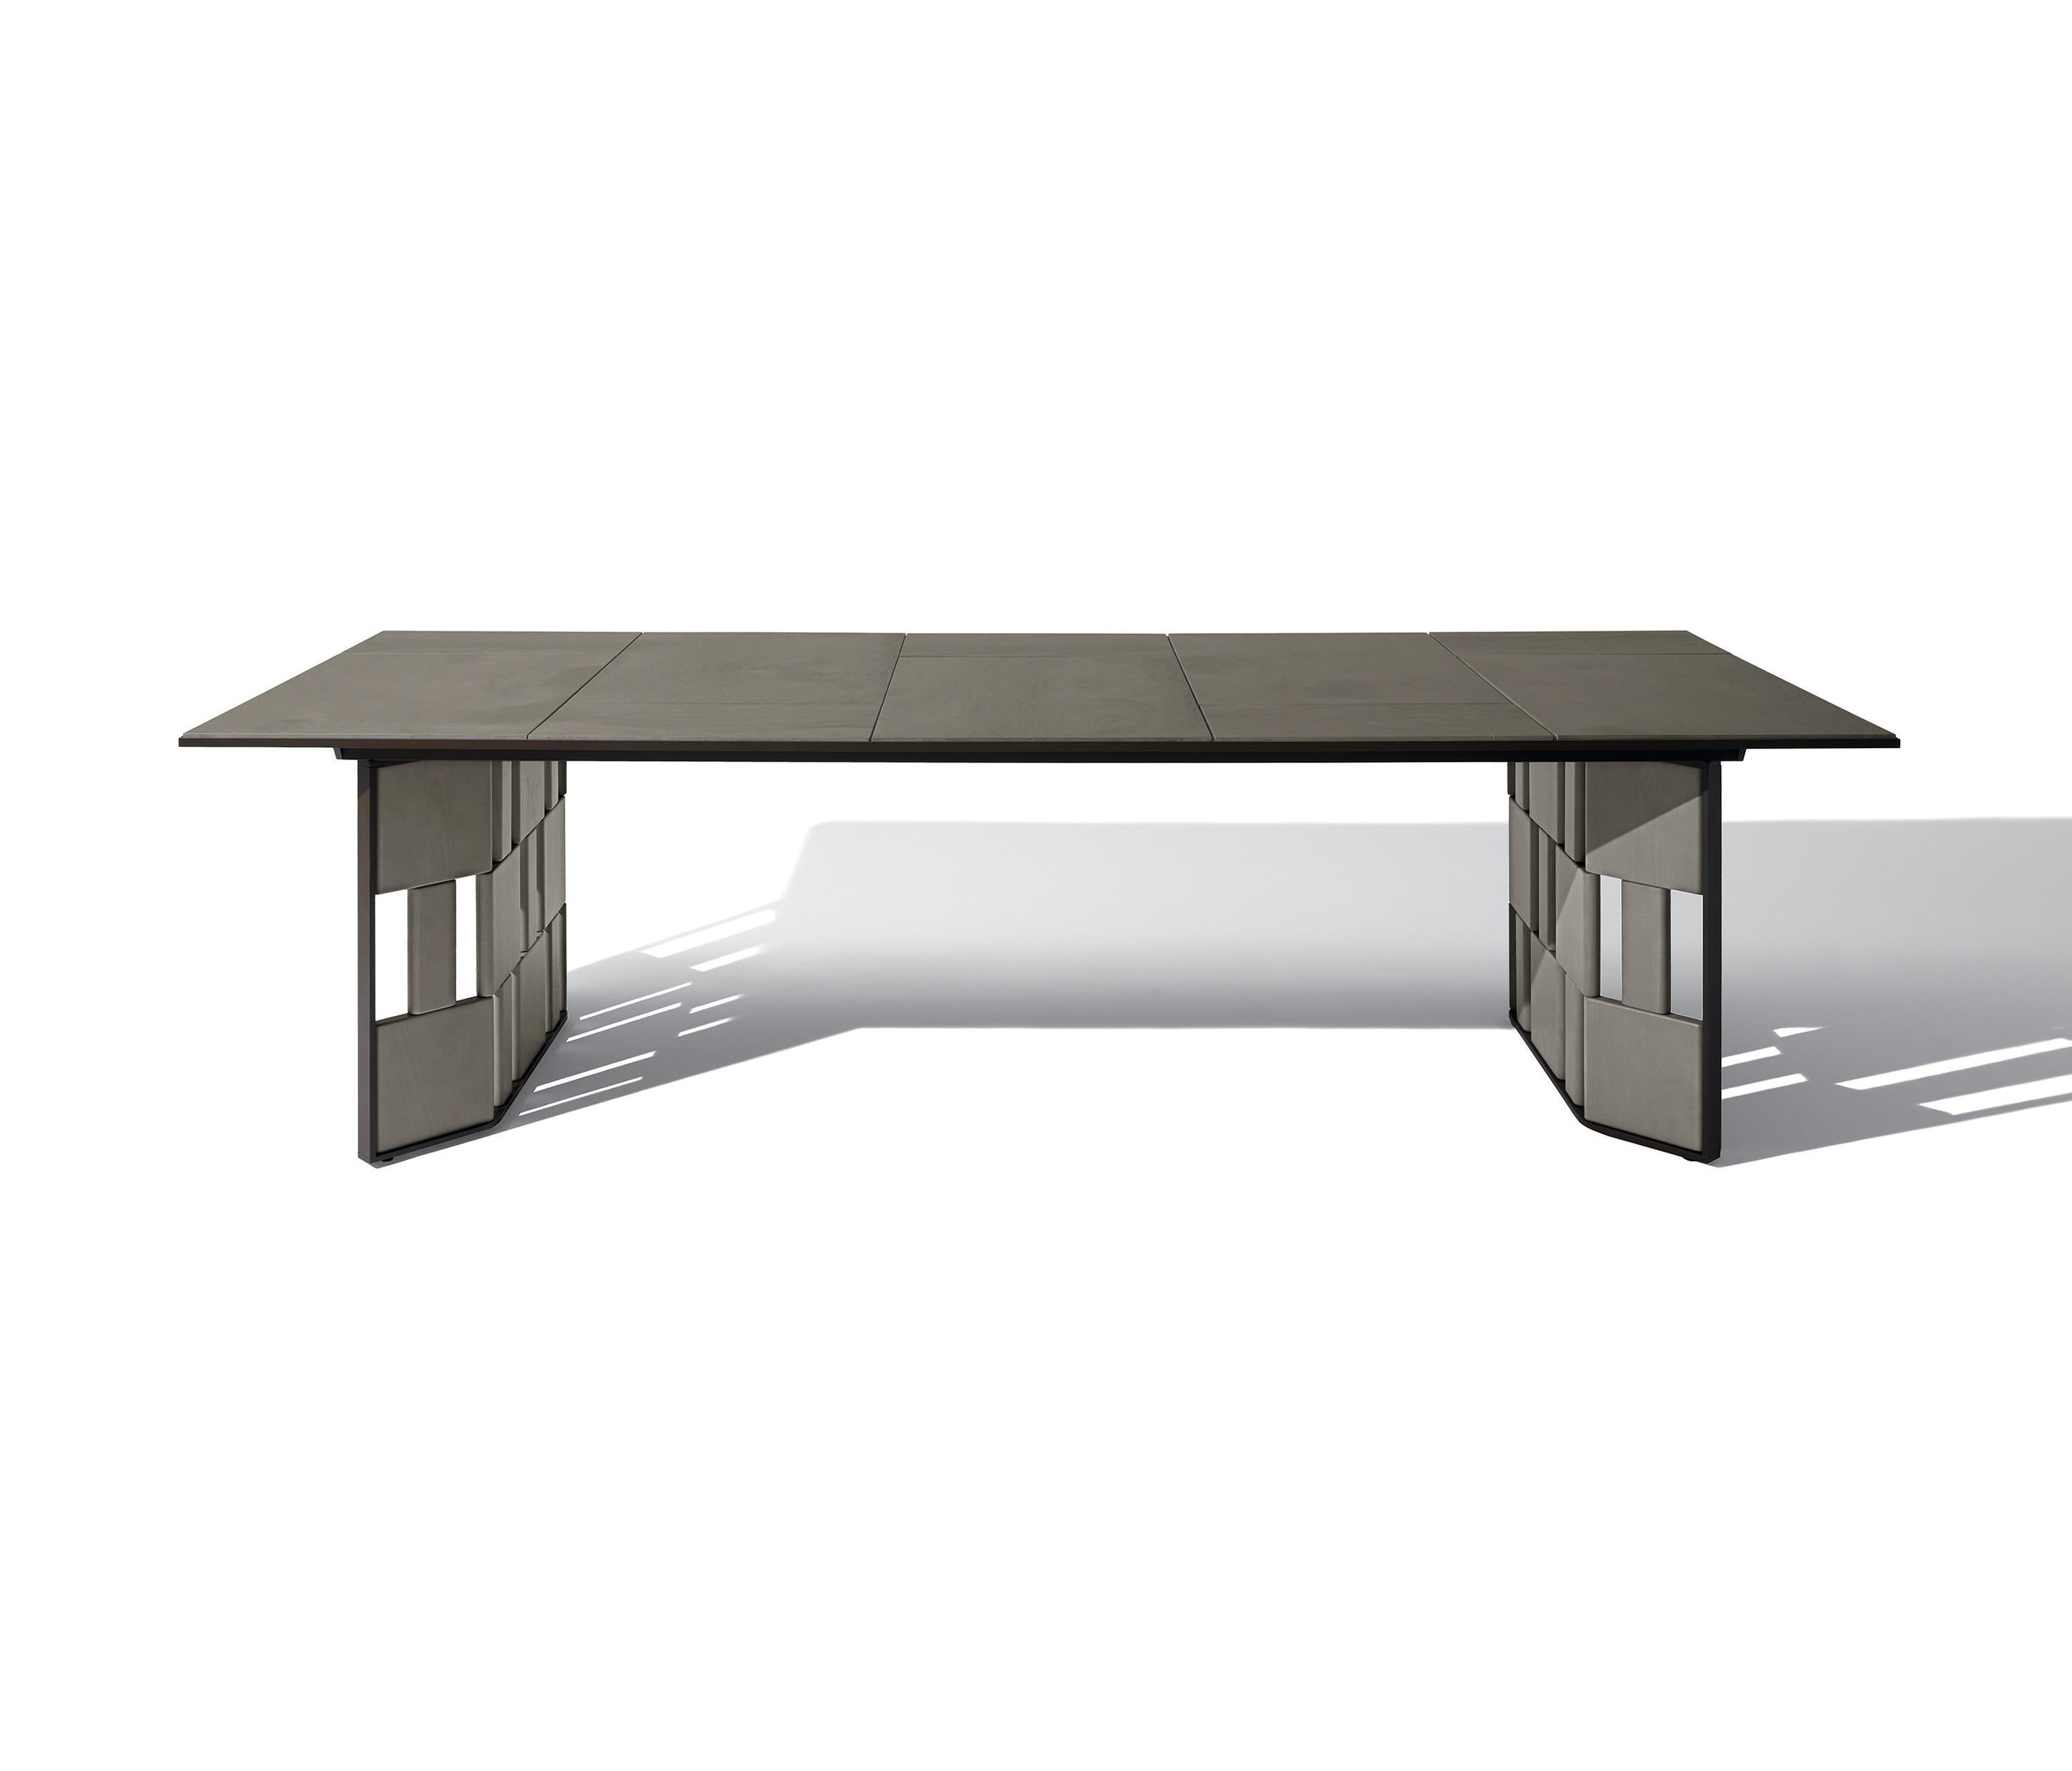 Ludovica+Roberto Palomba Designed the Break Outdoor Dining Table for Giorgetti that expresses the shape-function duality.

The Frame in made of aluminum and protected stainless steel, powder lacquered in carob color. The leg inserts are in ashwood